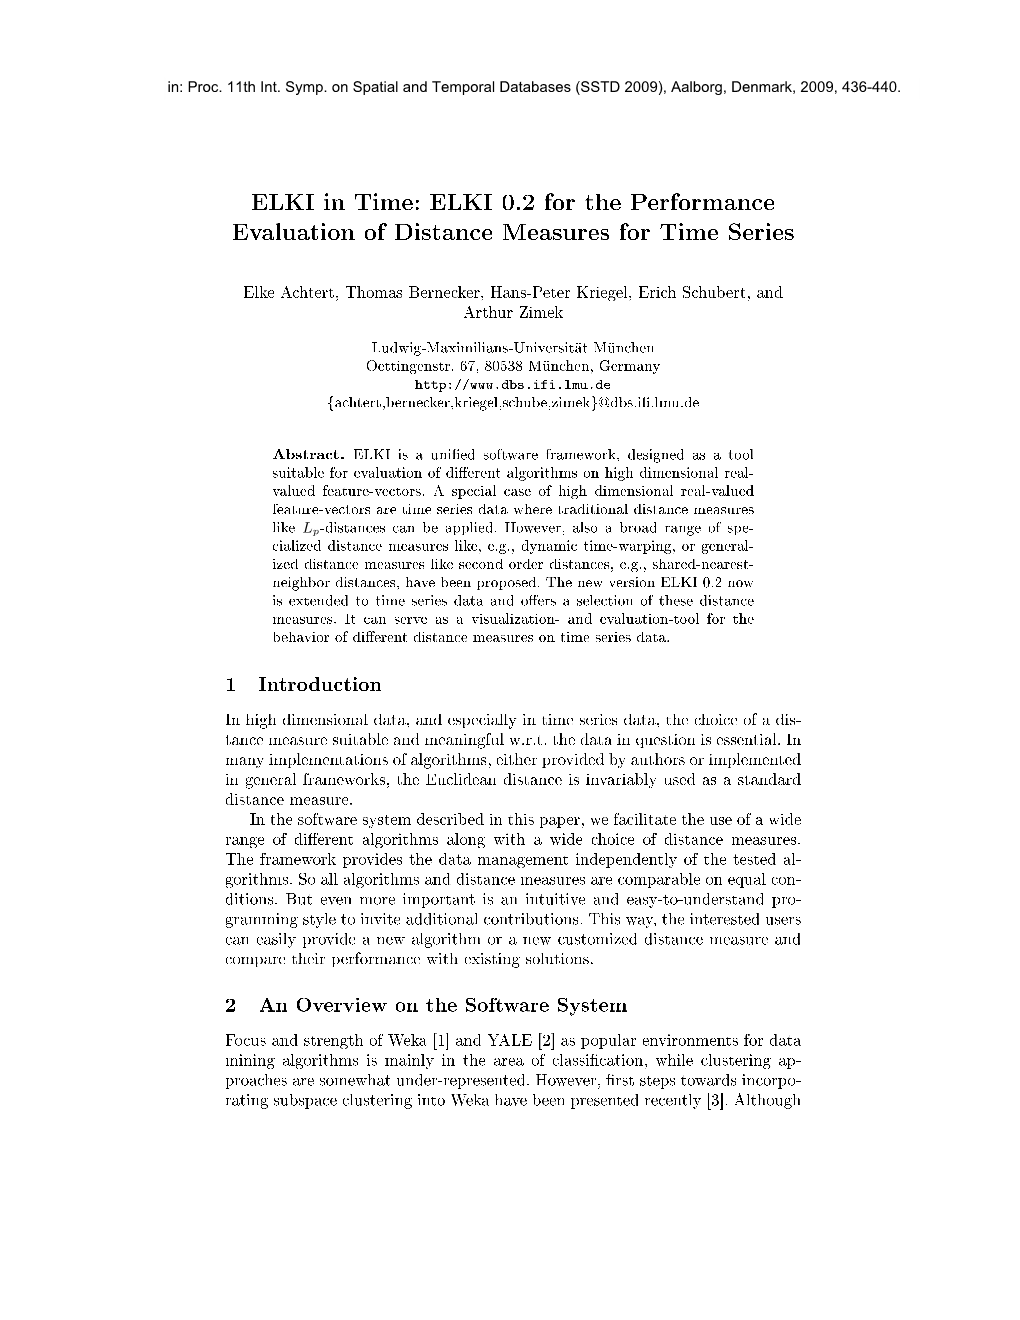 ELKI 0.2 for the Performance Evaluation of Distance Measures for Time Series